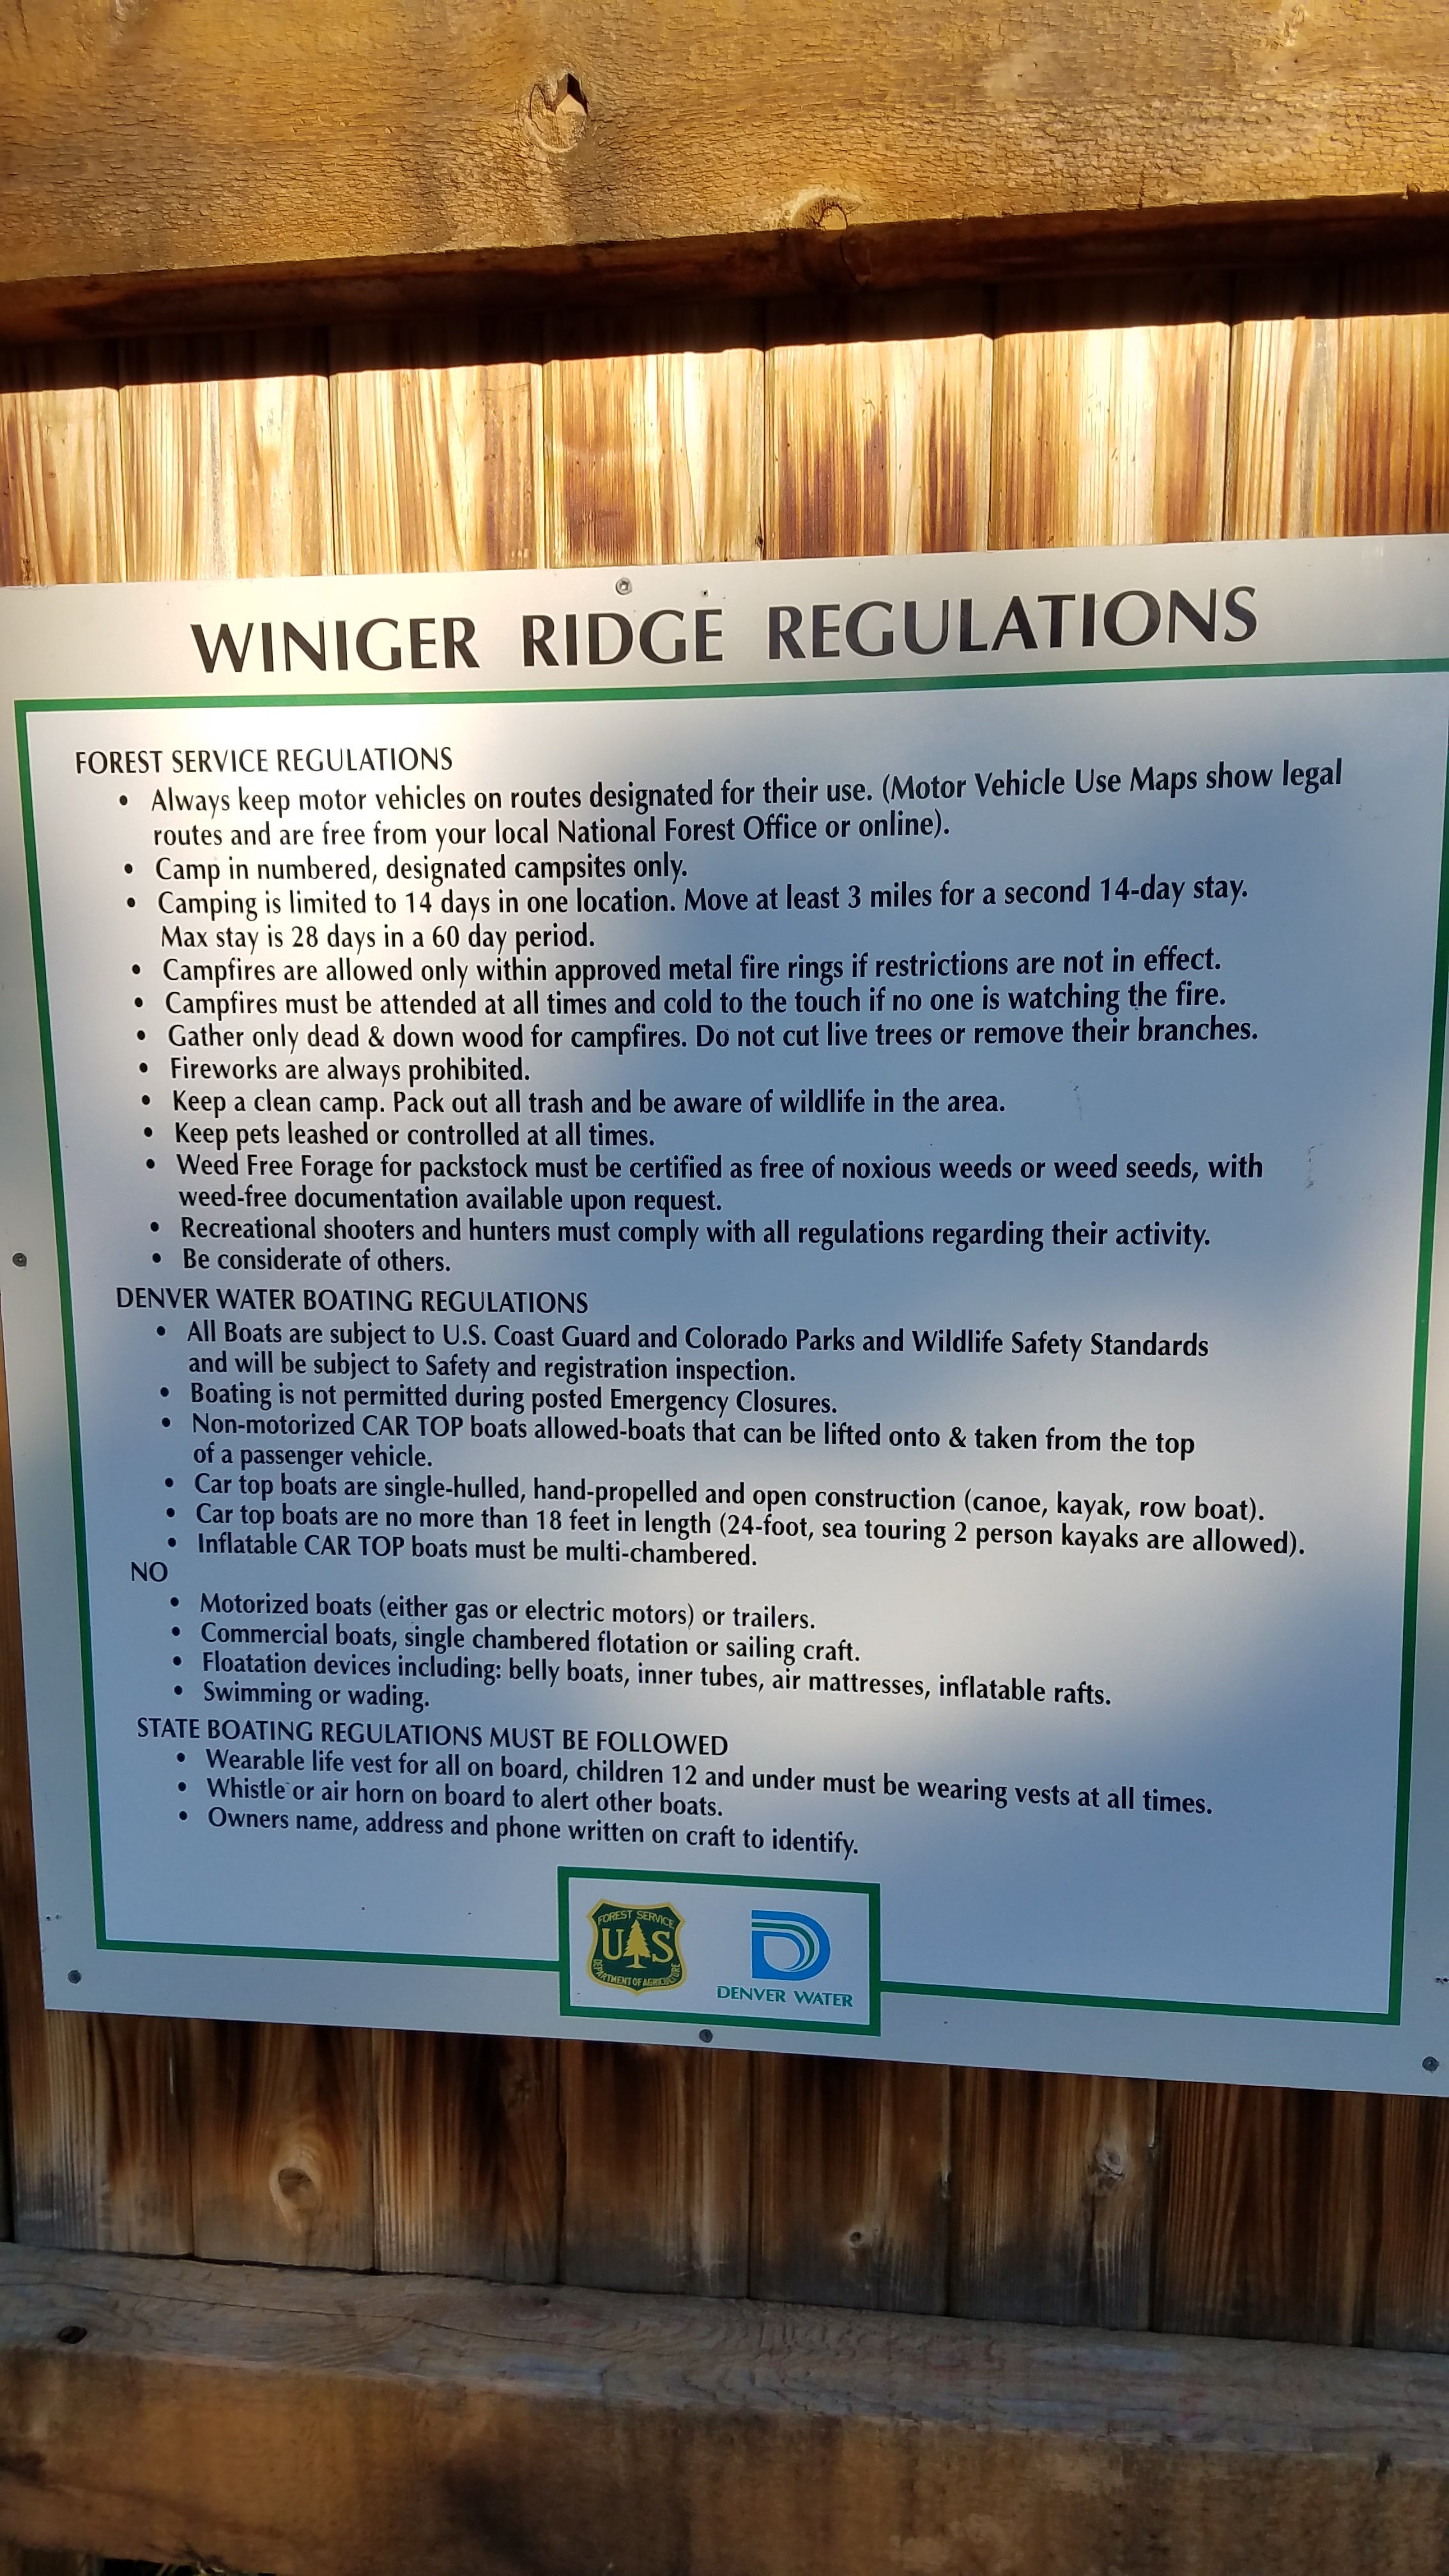 Camper submitted image from Winiger Ridge at Gross Reservoir - 1